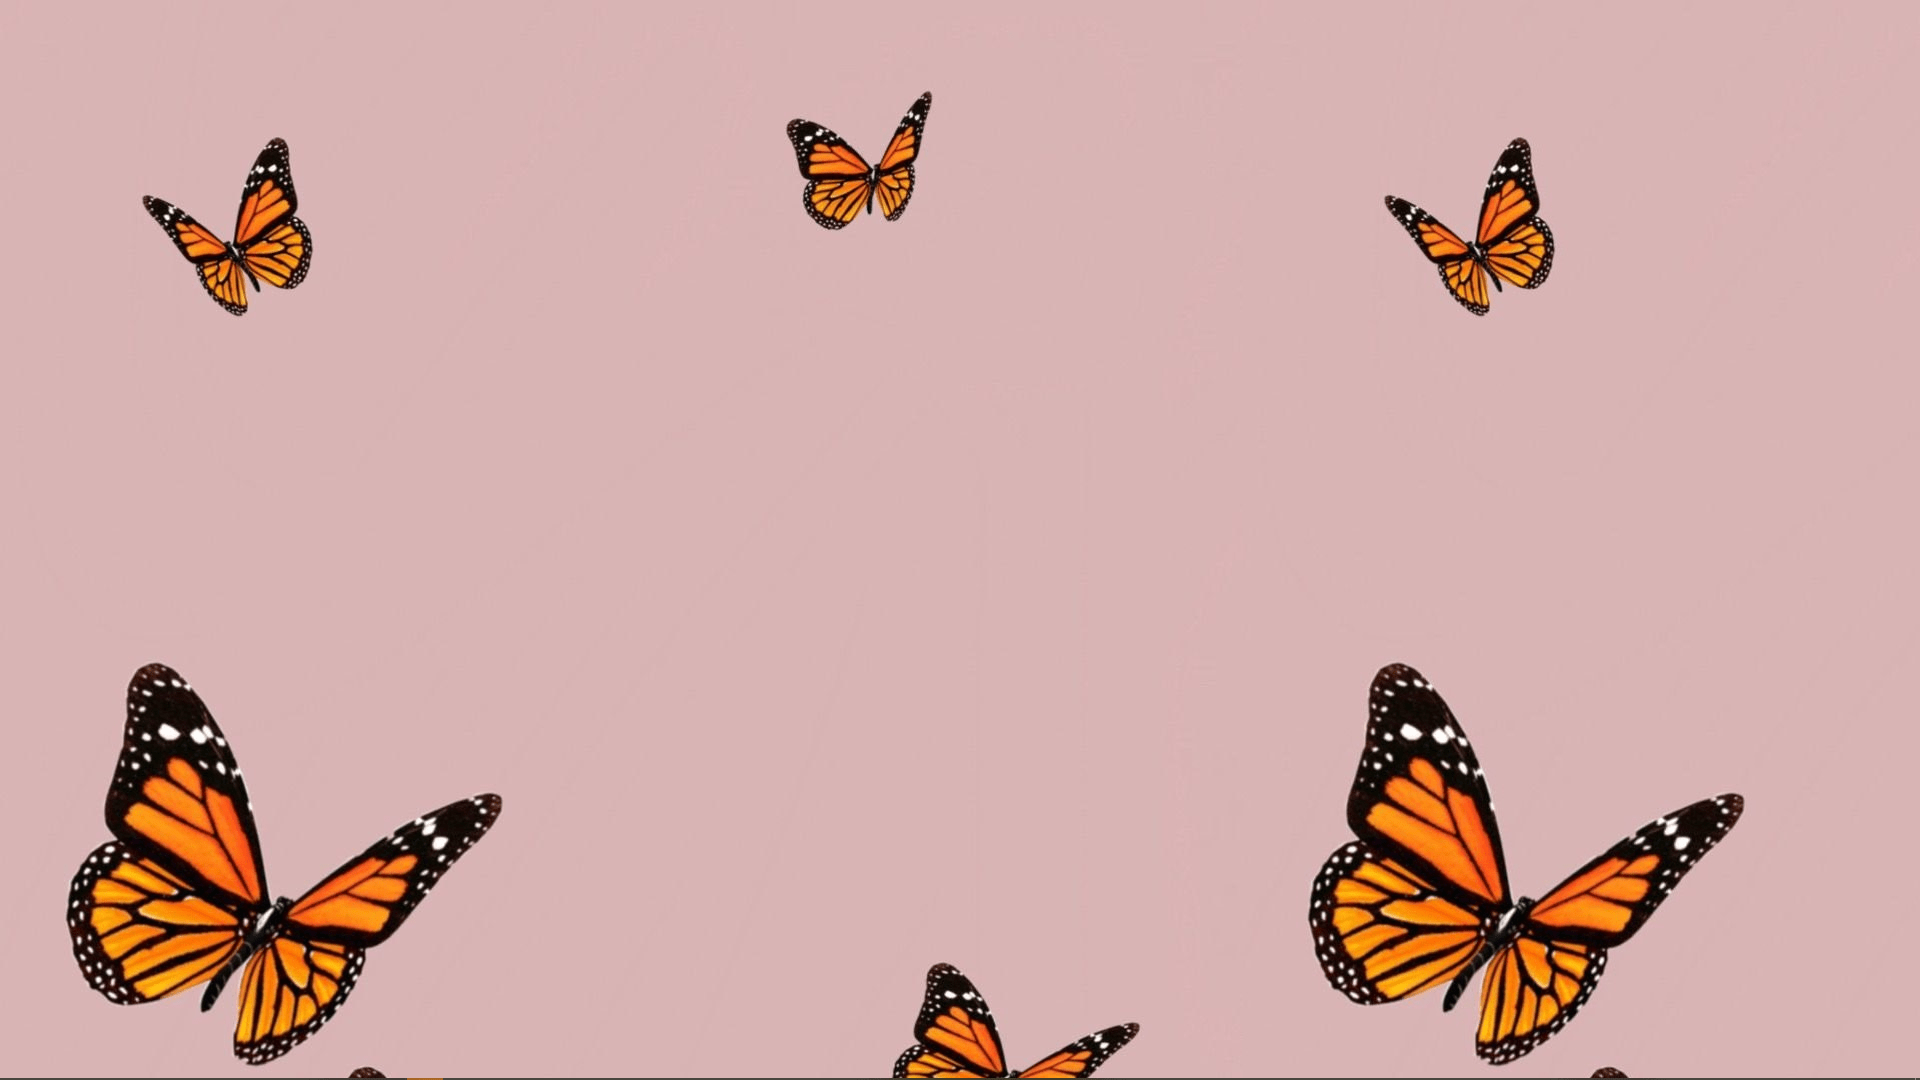 A group of orange butterflies are flying - Butterfly